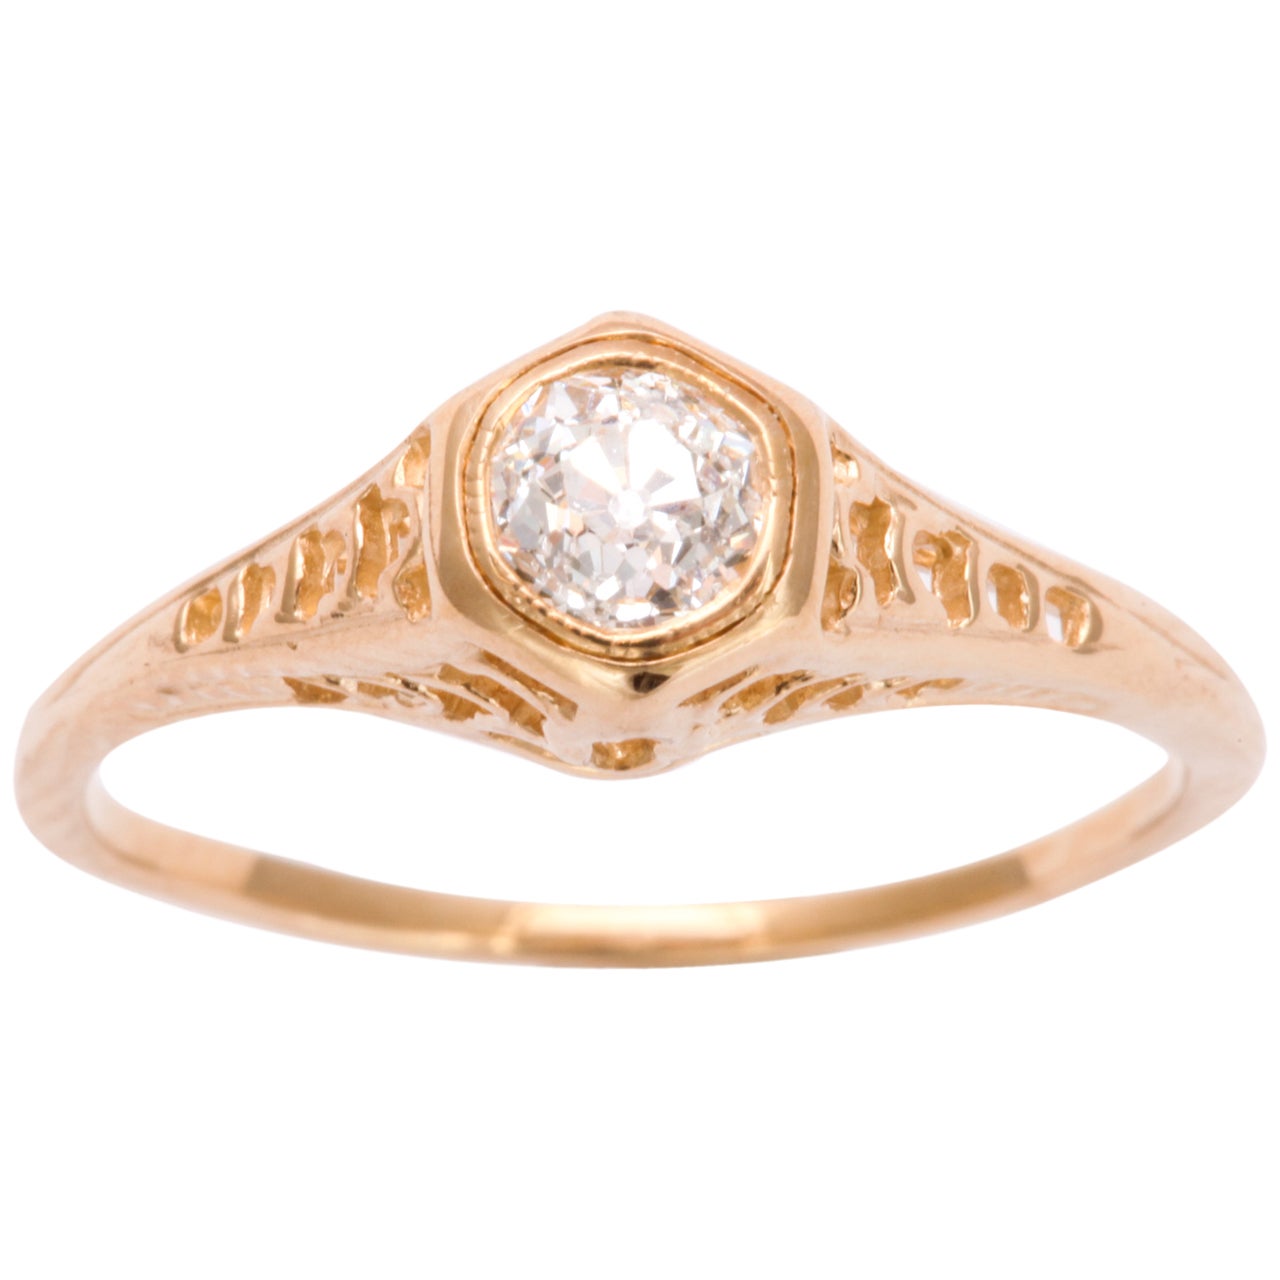 Distinctive Structure in an Art Deco Engagement Ring